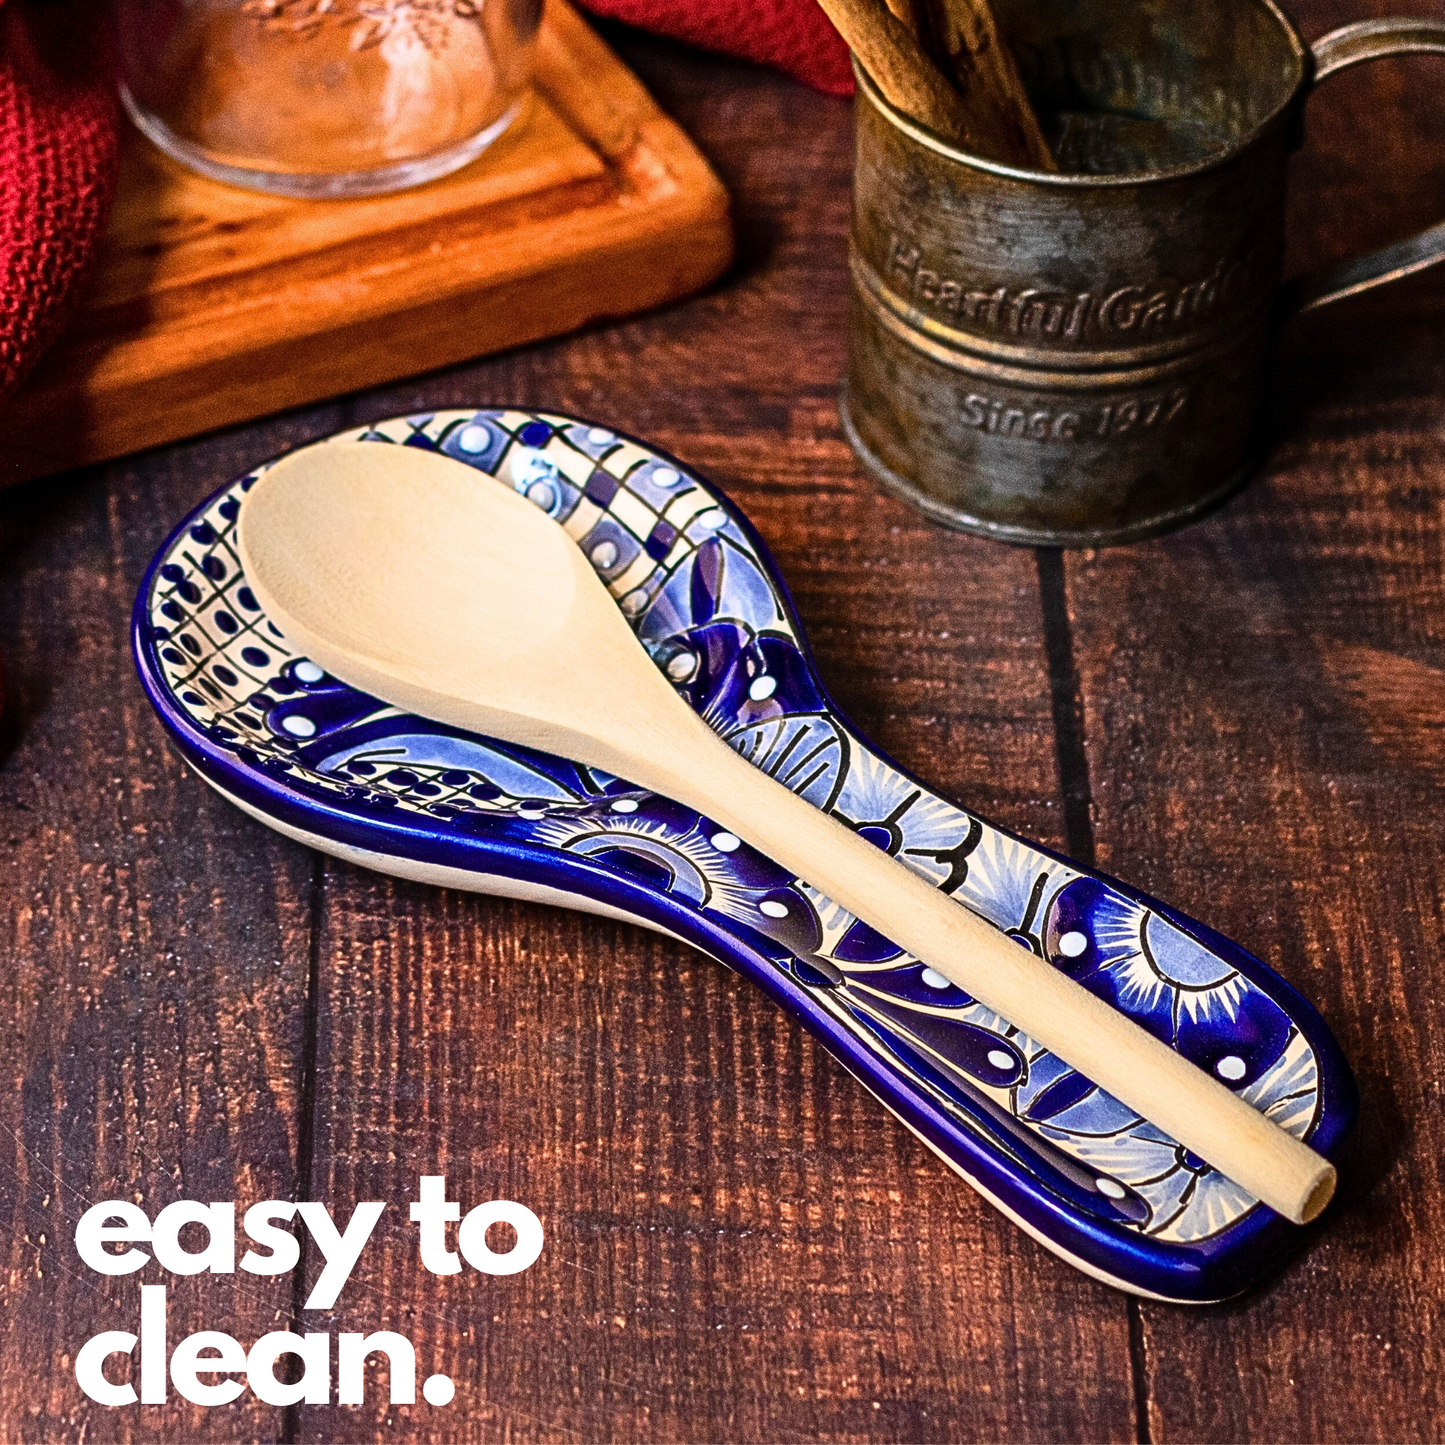 Charming blue & white Mexican handmade spoon rest, featuring handpainted folk art, made in Mexico as a unique porta cucharas spoon holder